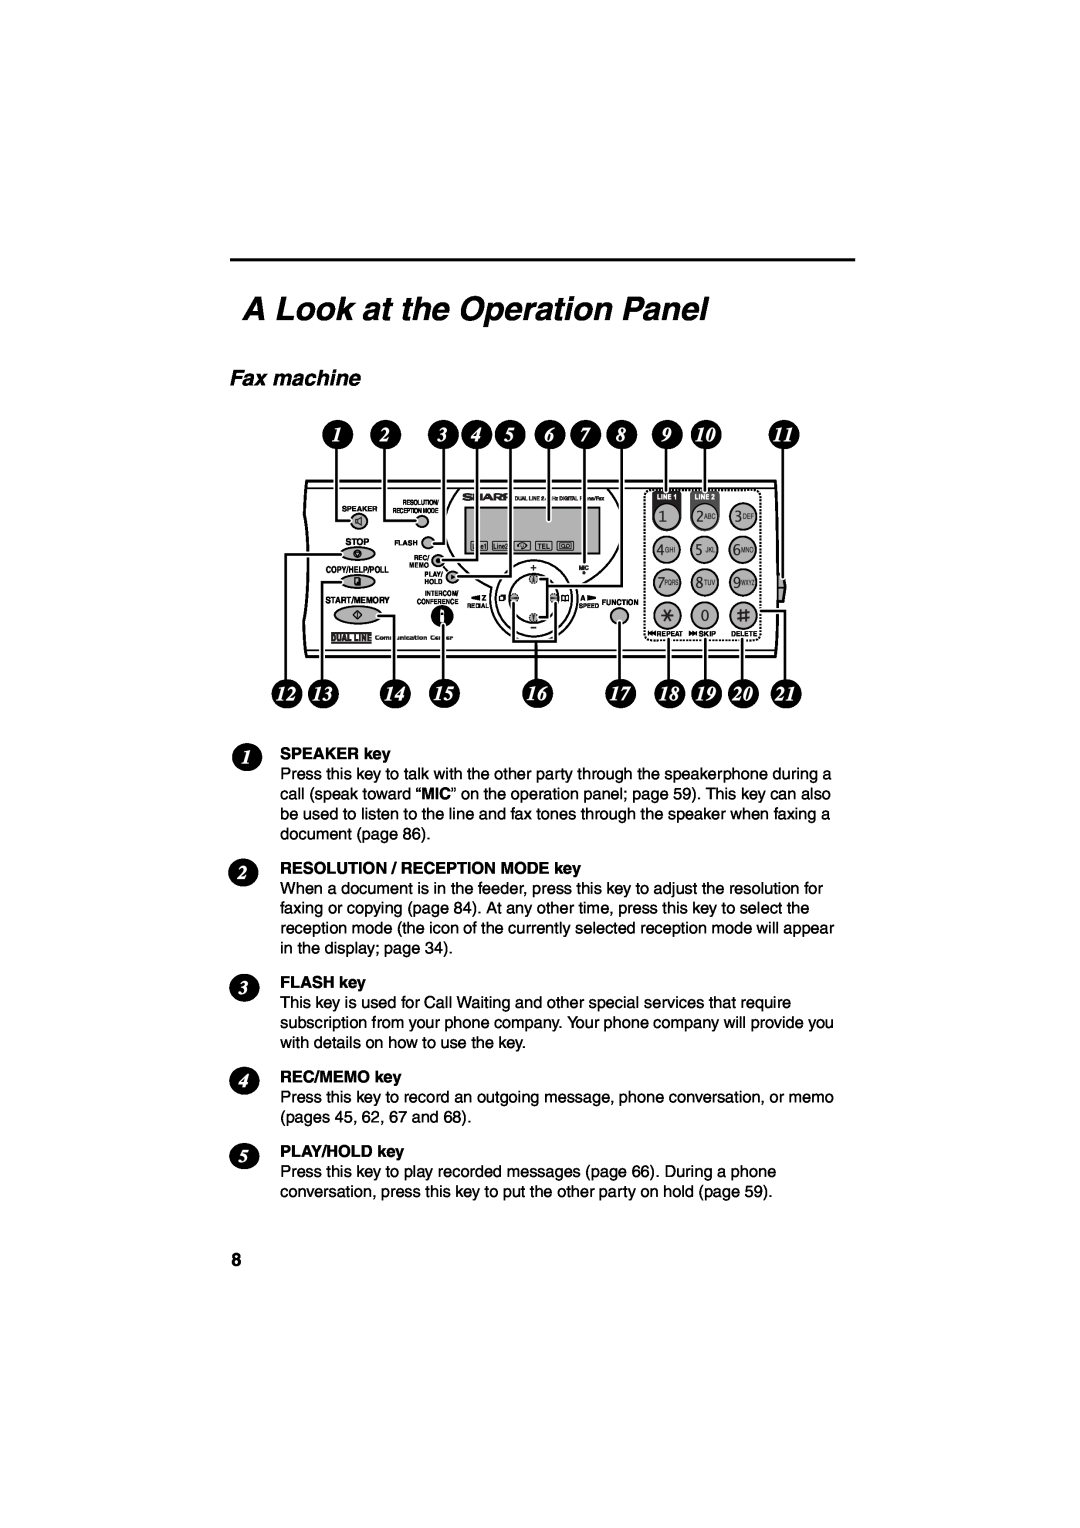 Sharp UX-CD600 operation manual A Look at the Operation Panel, Fax machine 